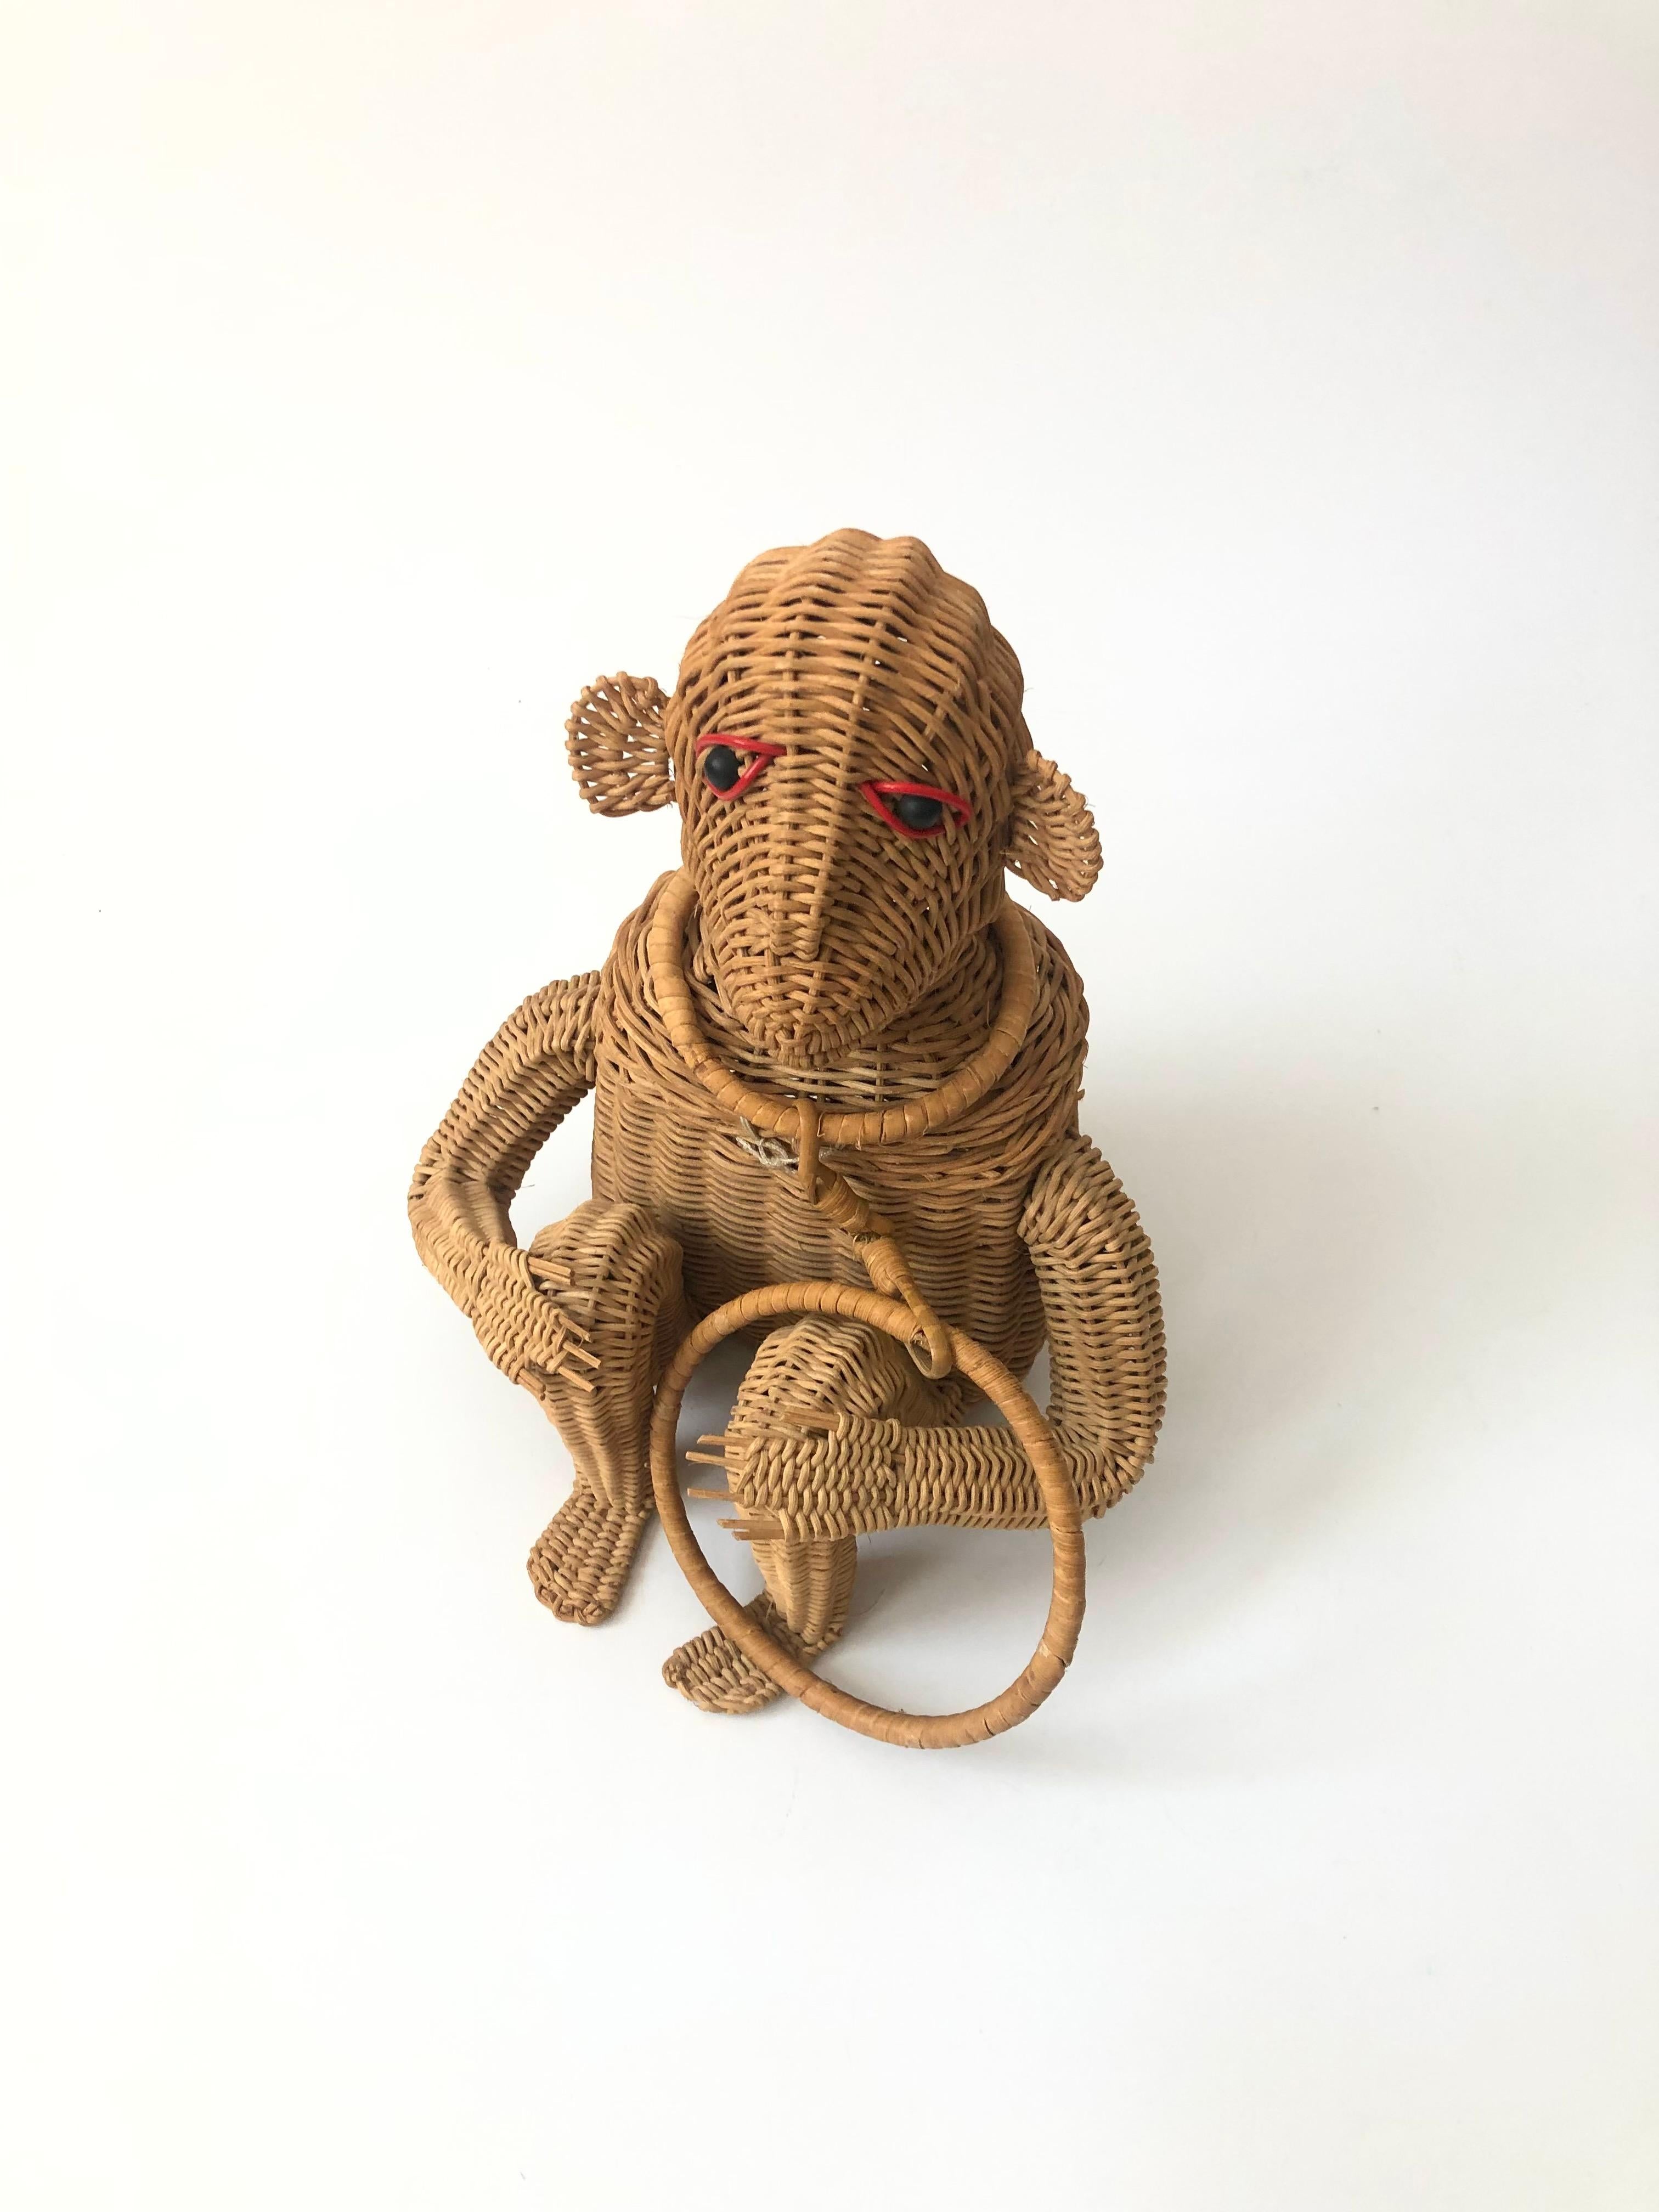 A mid century figural wicker purse in the shape of a monkey. An adorable design of a seated monkey made with great attention to detail to create the monkey's features. Red plastic line the eyes. Hinges open from the front to reveal a roomy interior.